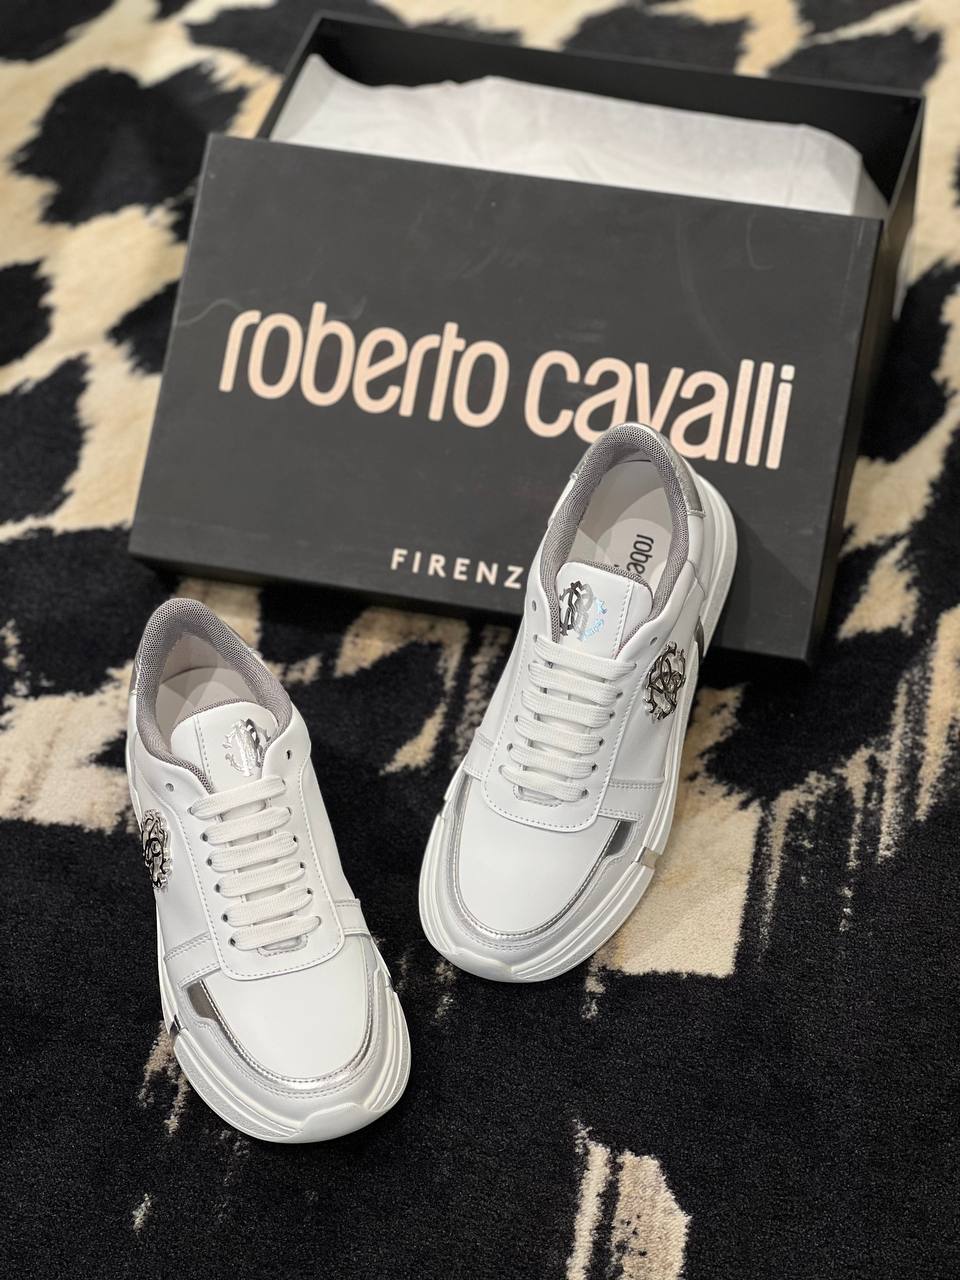 Roberto Cavalli Outlets 4694